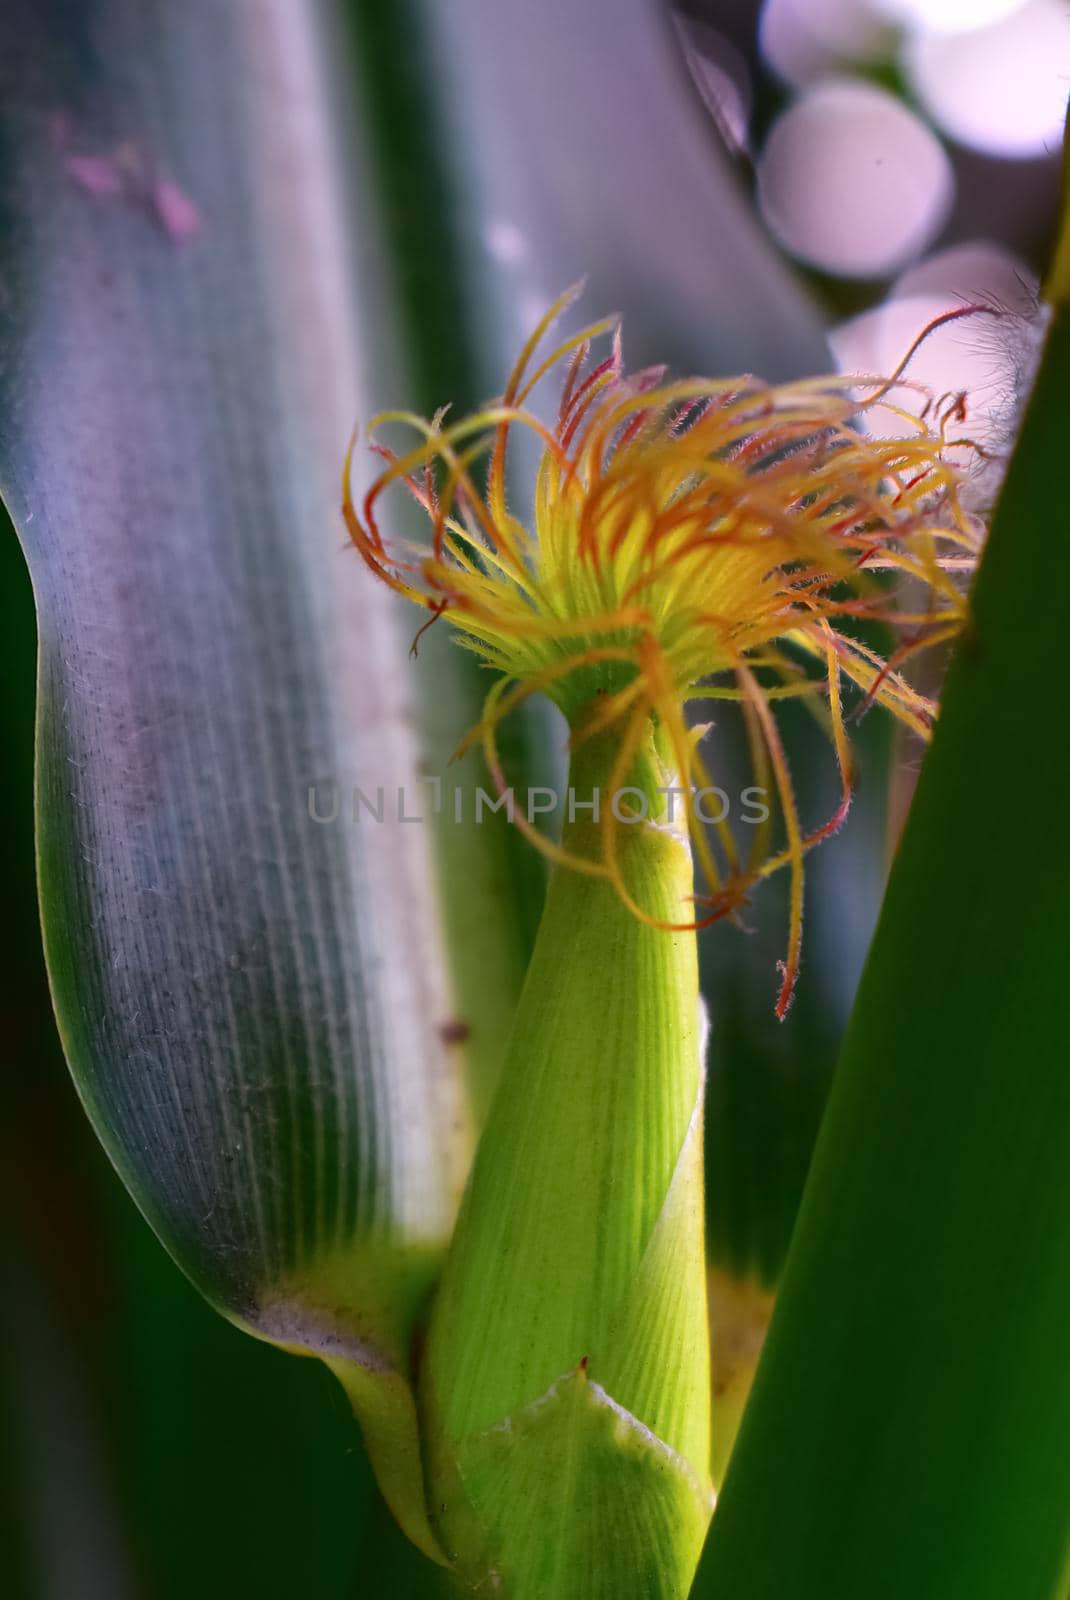 Scadoxus multiflorus or commonly called blood lily looks in contrast to the background. Use as background or design elements. by tabishere